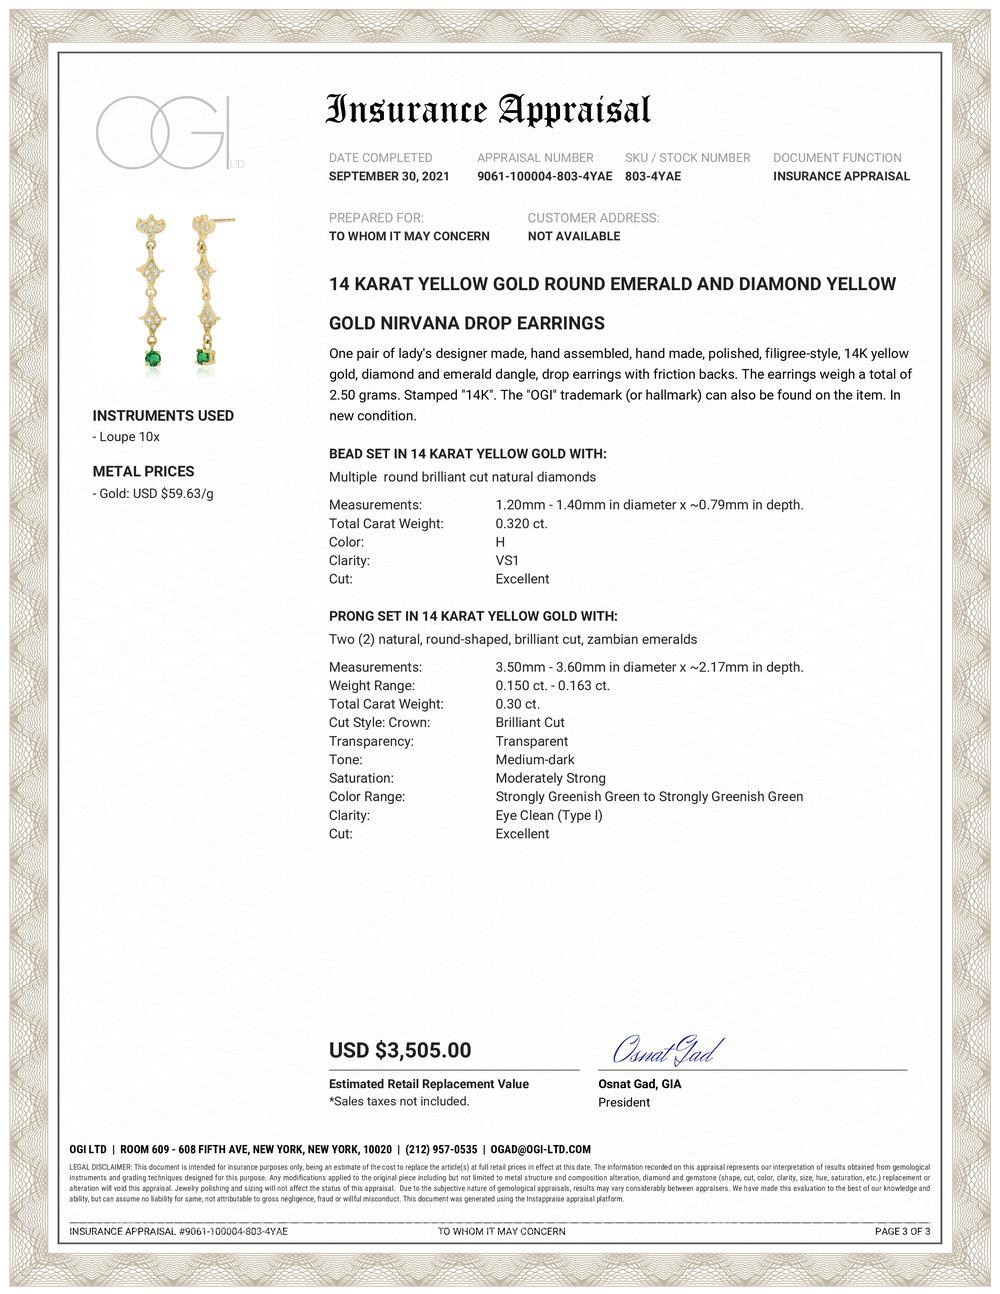 Fourteen karats yellow gold diamond and emerald Nirvana drop earrings 
Earrings are 1.20 inches long
Two round shape emerald weighing 0.30 carat
Diamond weighing 0.32 carat 
New Earrings
Handmade in the USA
One of a kind earrings 
Our design team